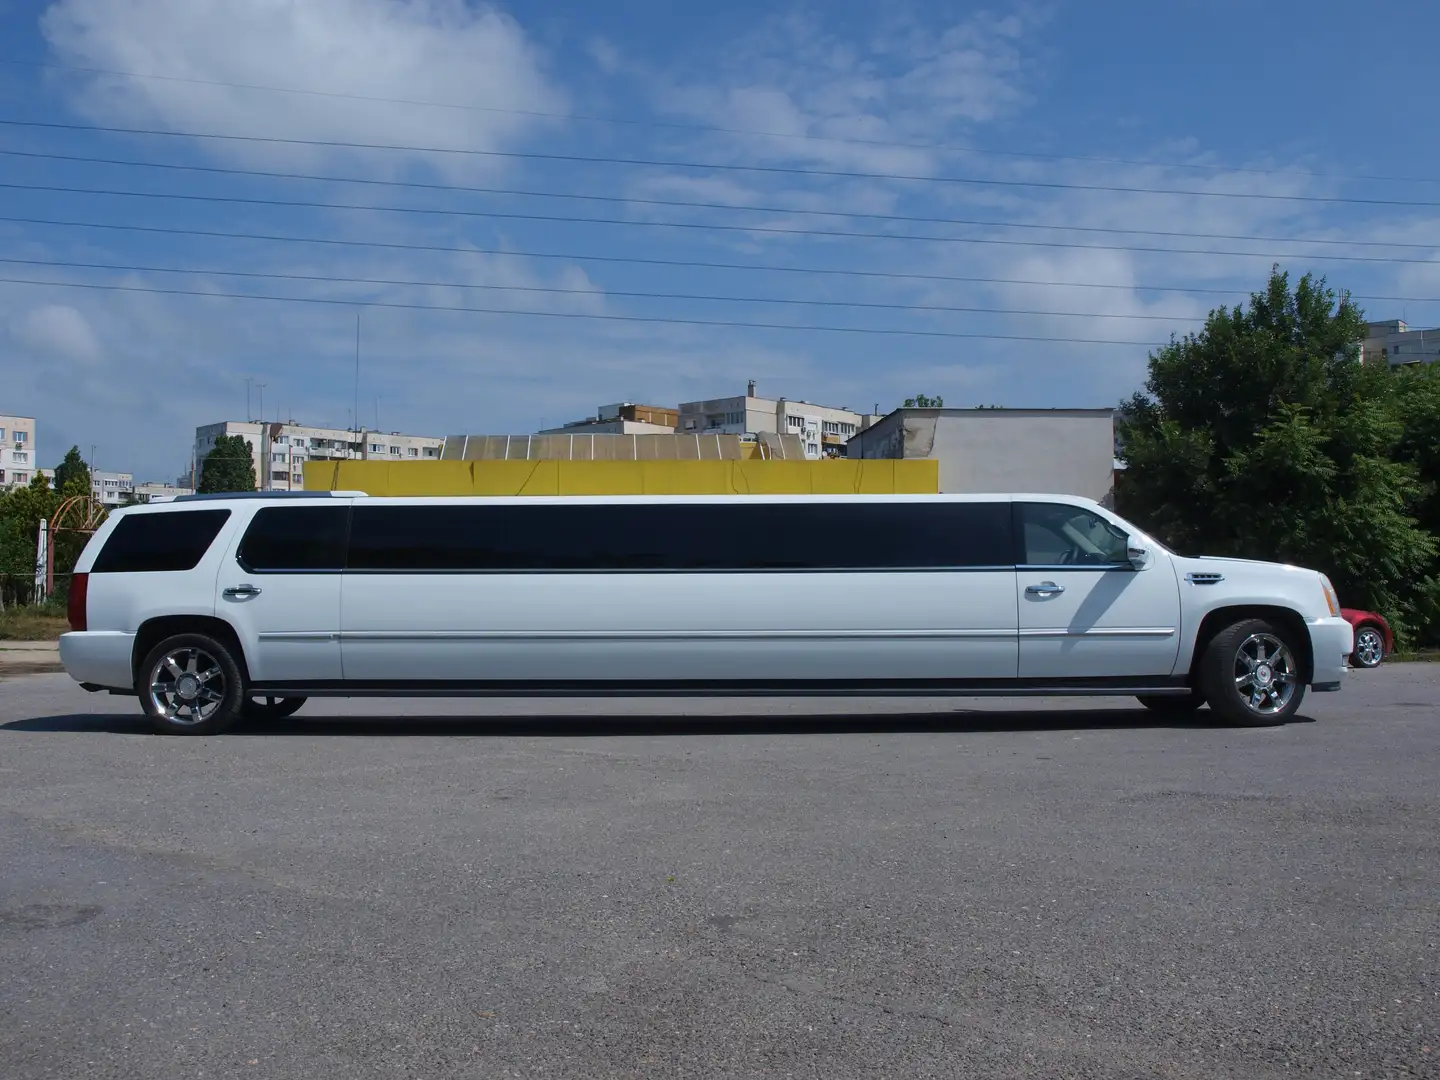 Cadillac Escalade 203-inch Stretch Limousine by Moonlight Industries Білий - 2